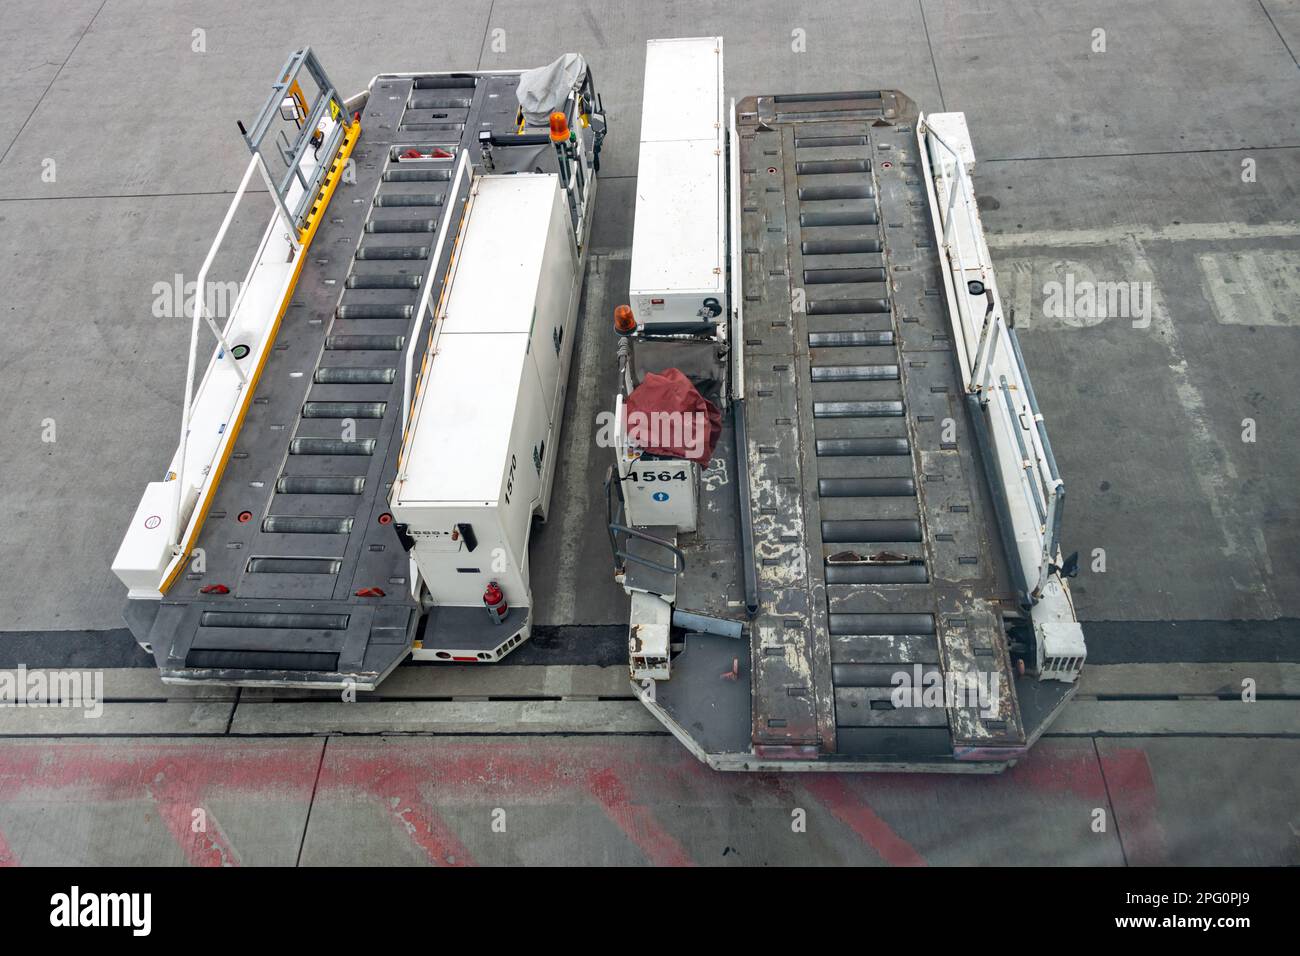 A two mobile cargo transporter parked at an international airport Stock Photo